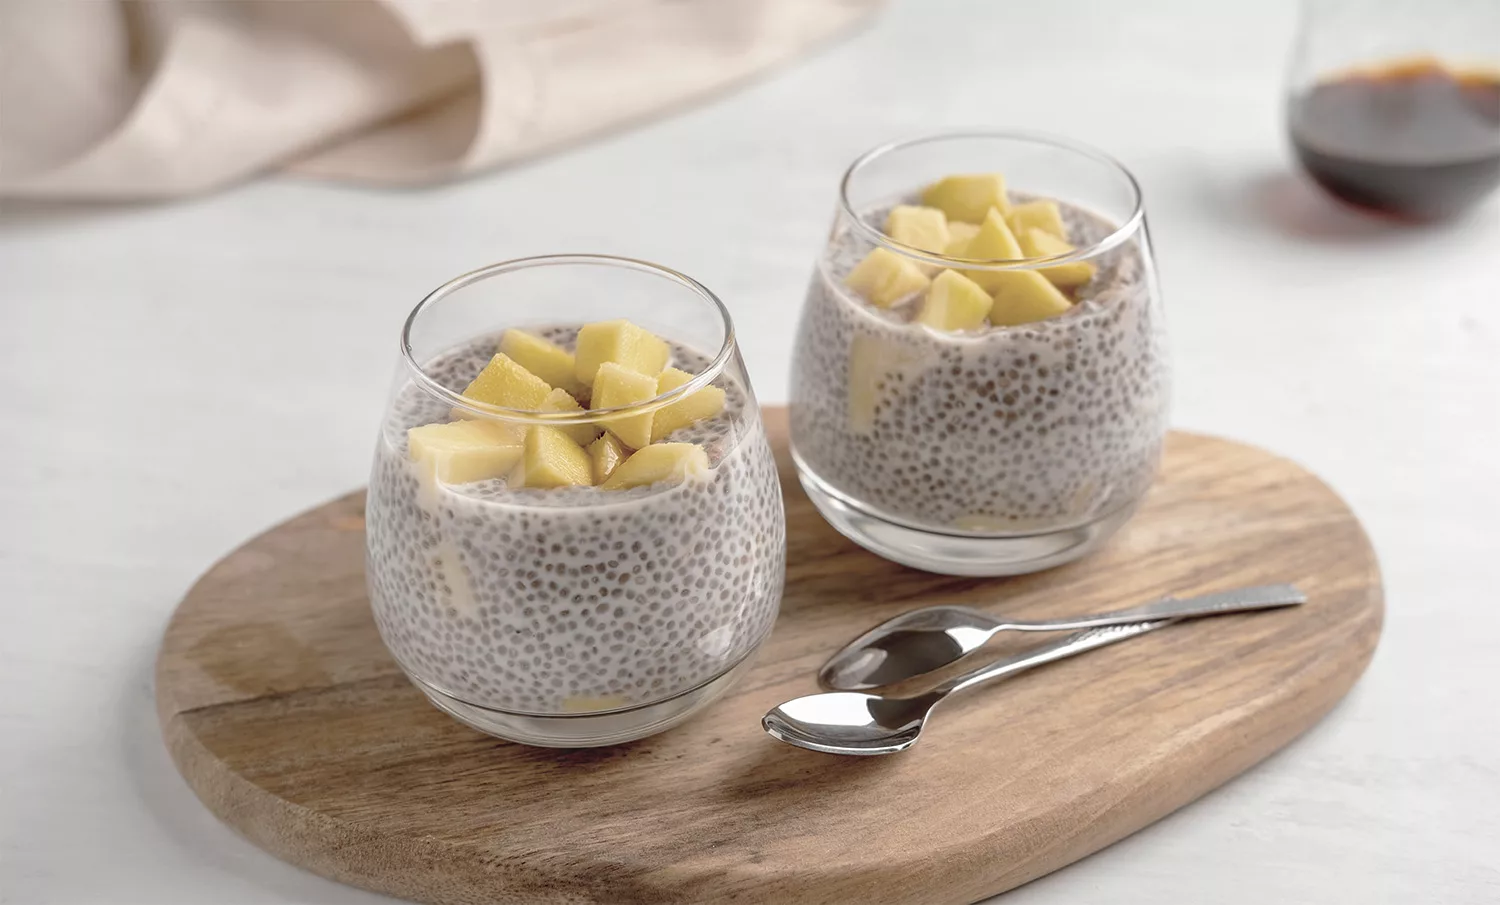 chia seeds is one of superfoods that are packed with nutritions